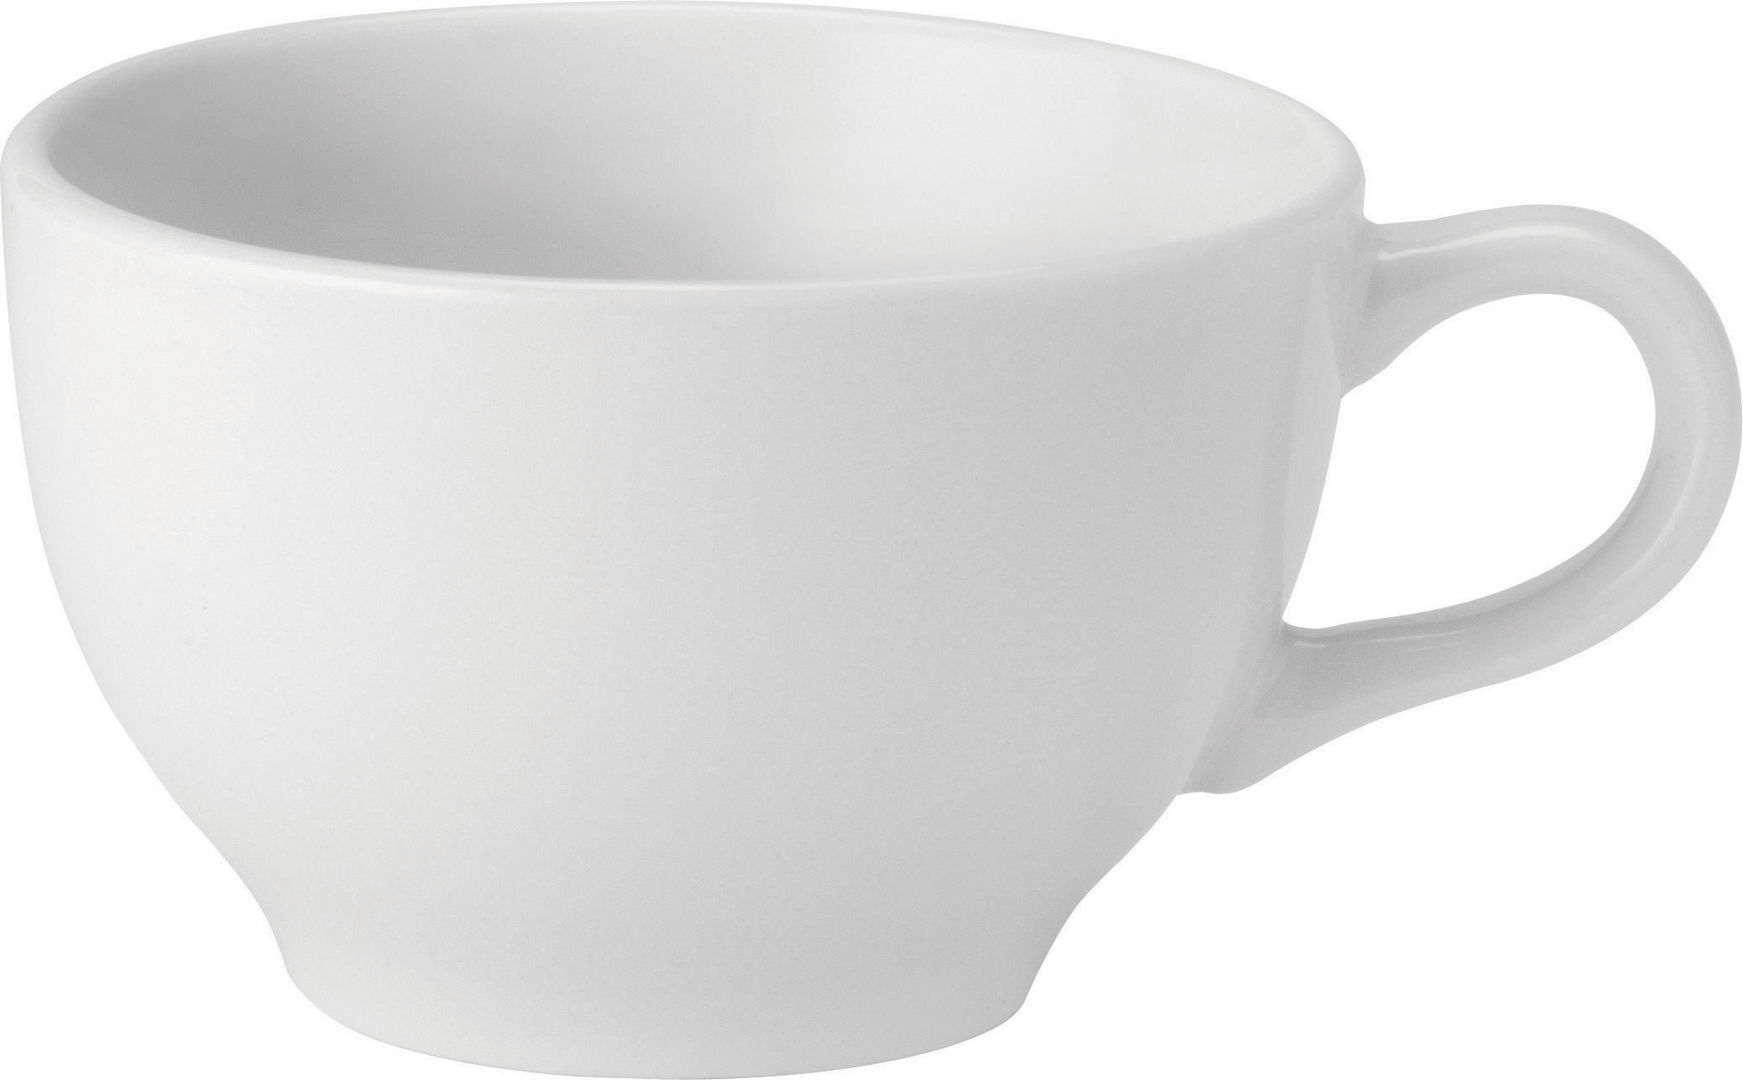 Pure White Cappuccino Cup 12oz (34cl) - E60034-000000-B06036 (Pack of 36)